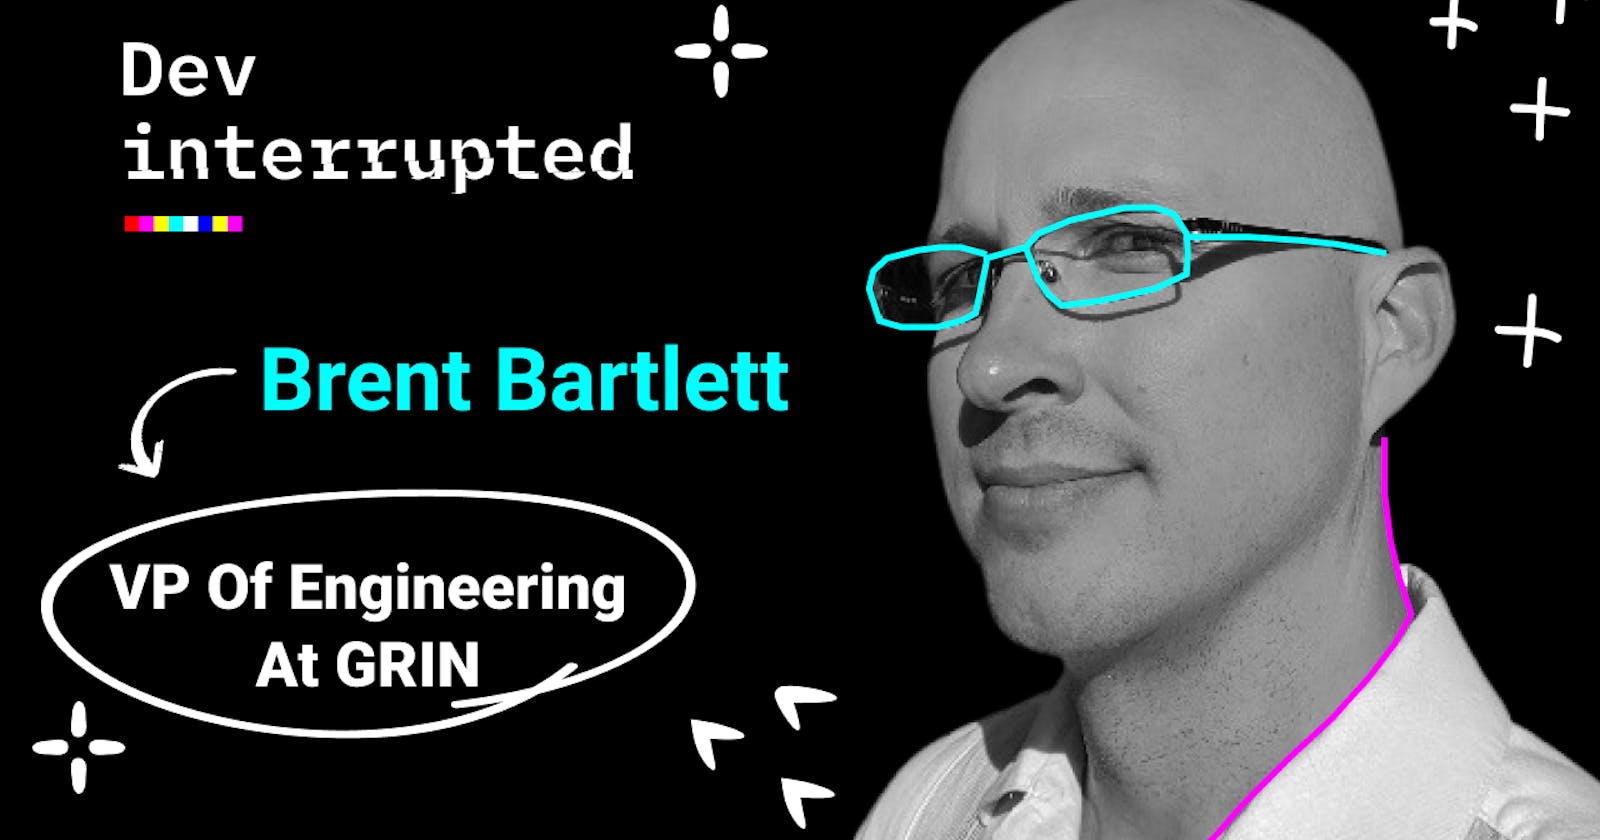 How the Influencer Unicorn does Engineering w/ GRIN